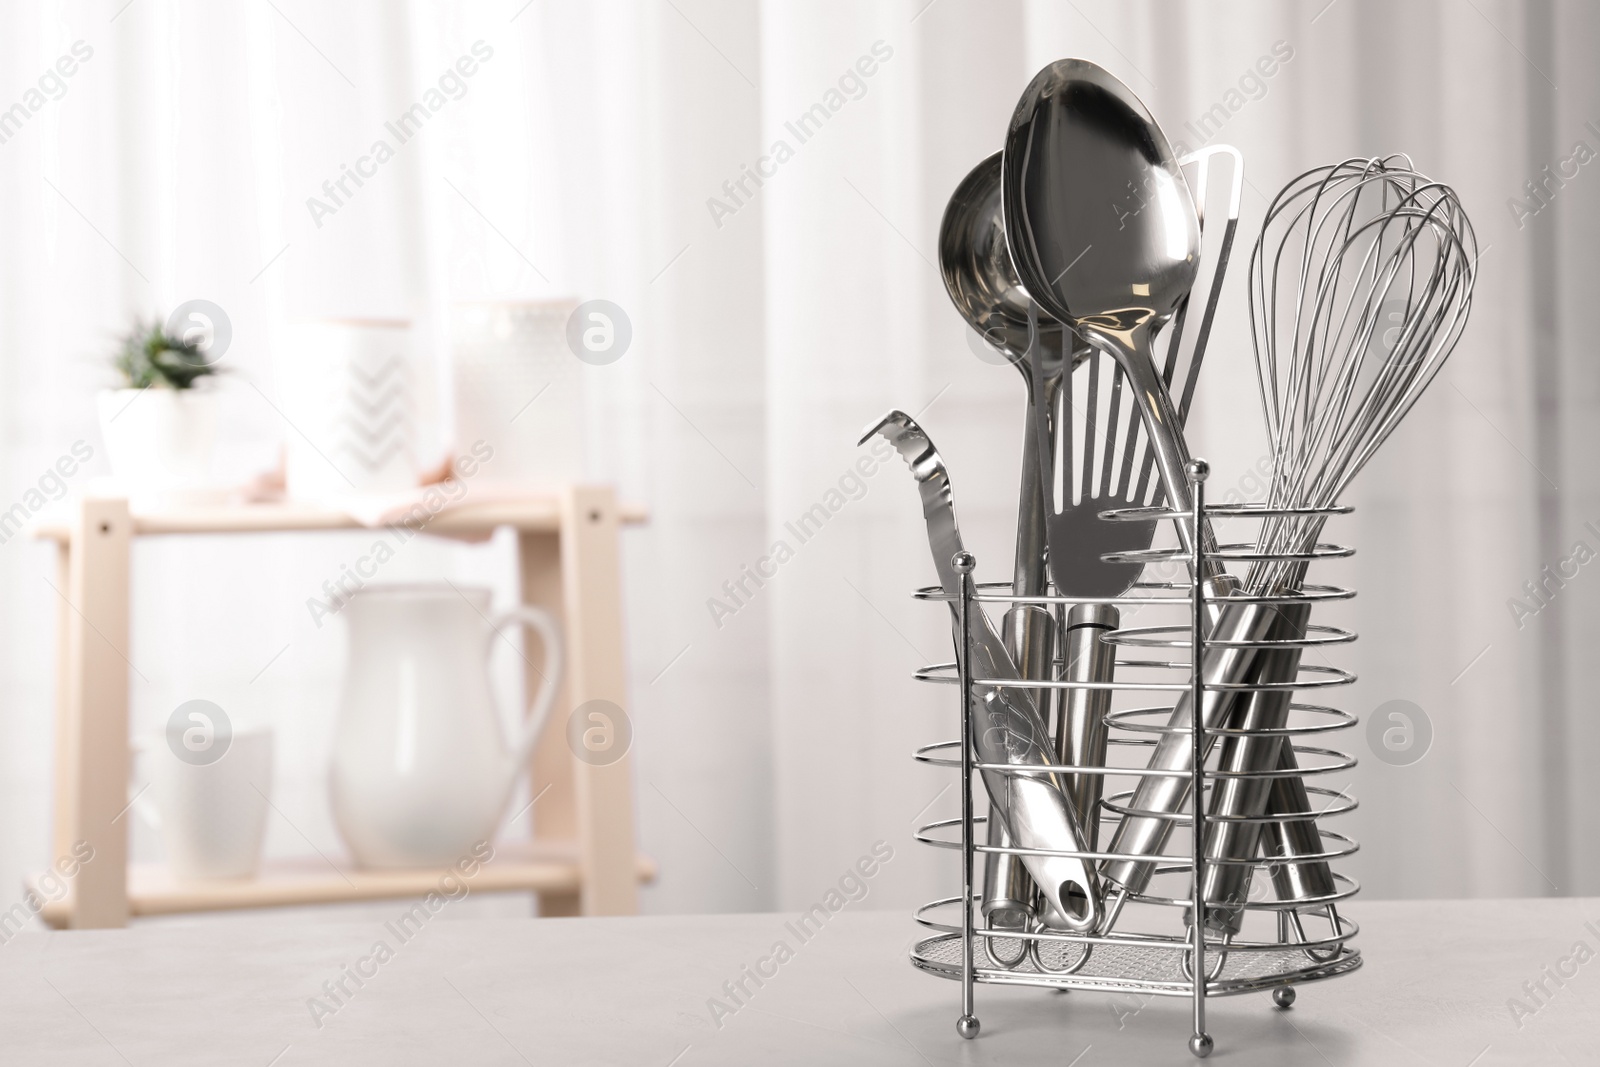 Photo of Holder with clean utensils on table in kitchen. Space for text